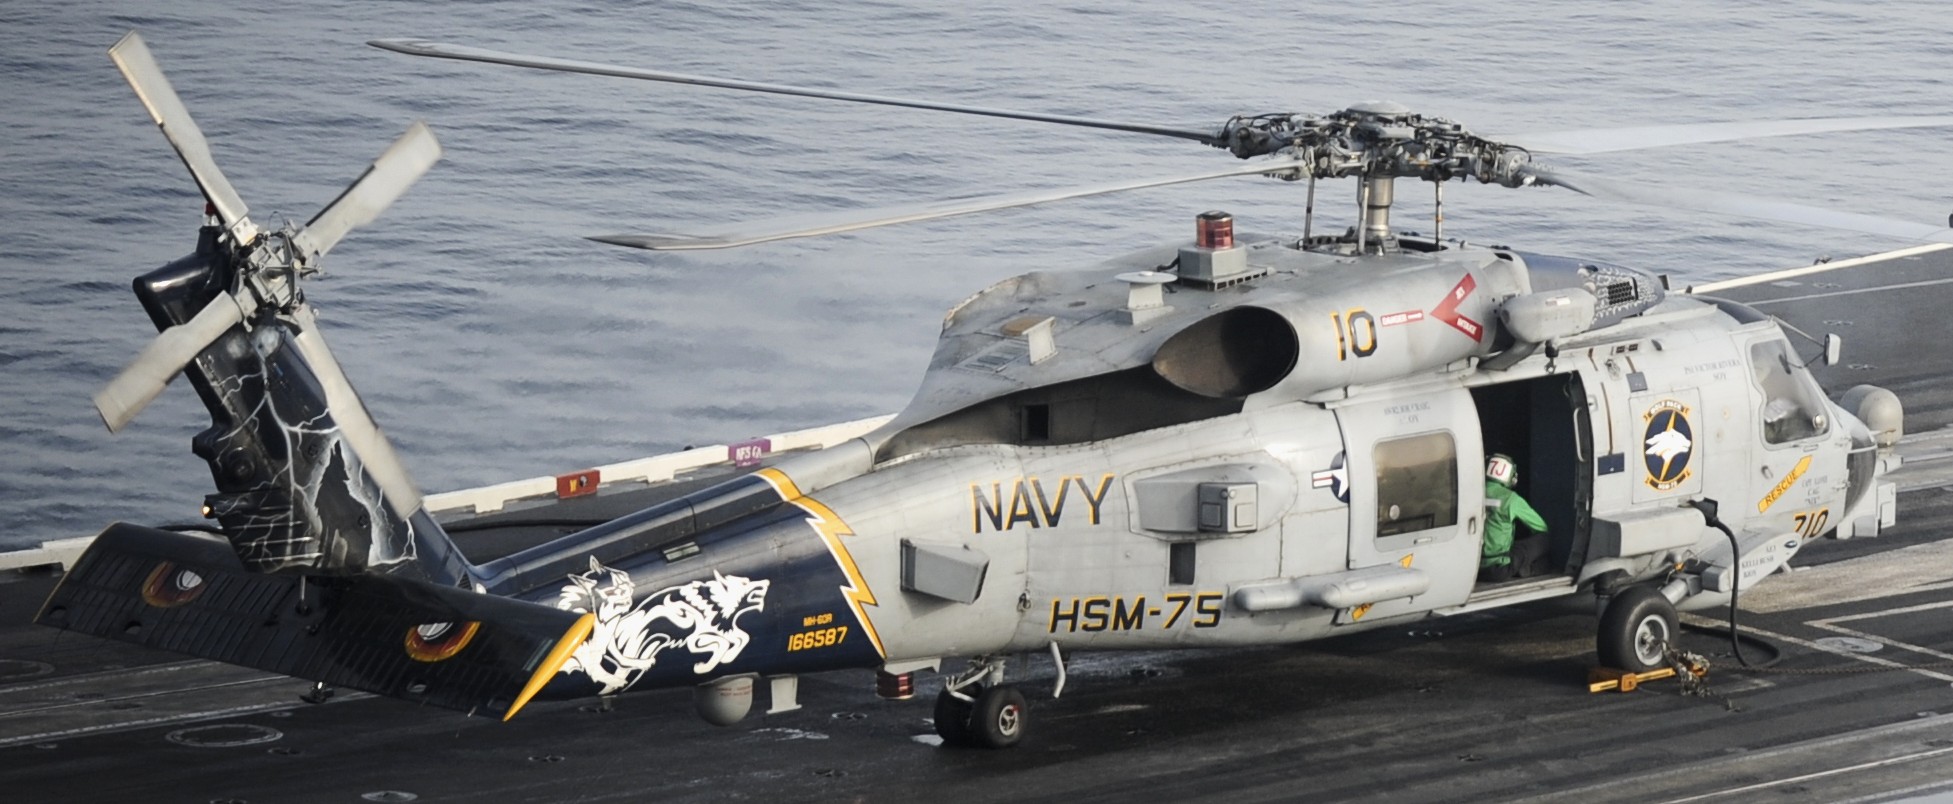 hsm-75 wolfpack helicopter maritime strike squadron us navy mh-60r seahawk 2013 57